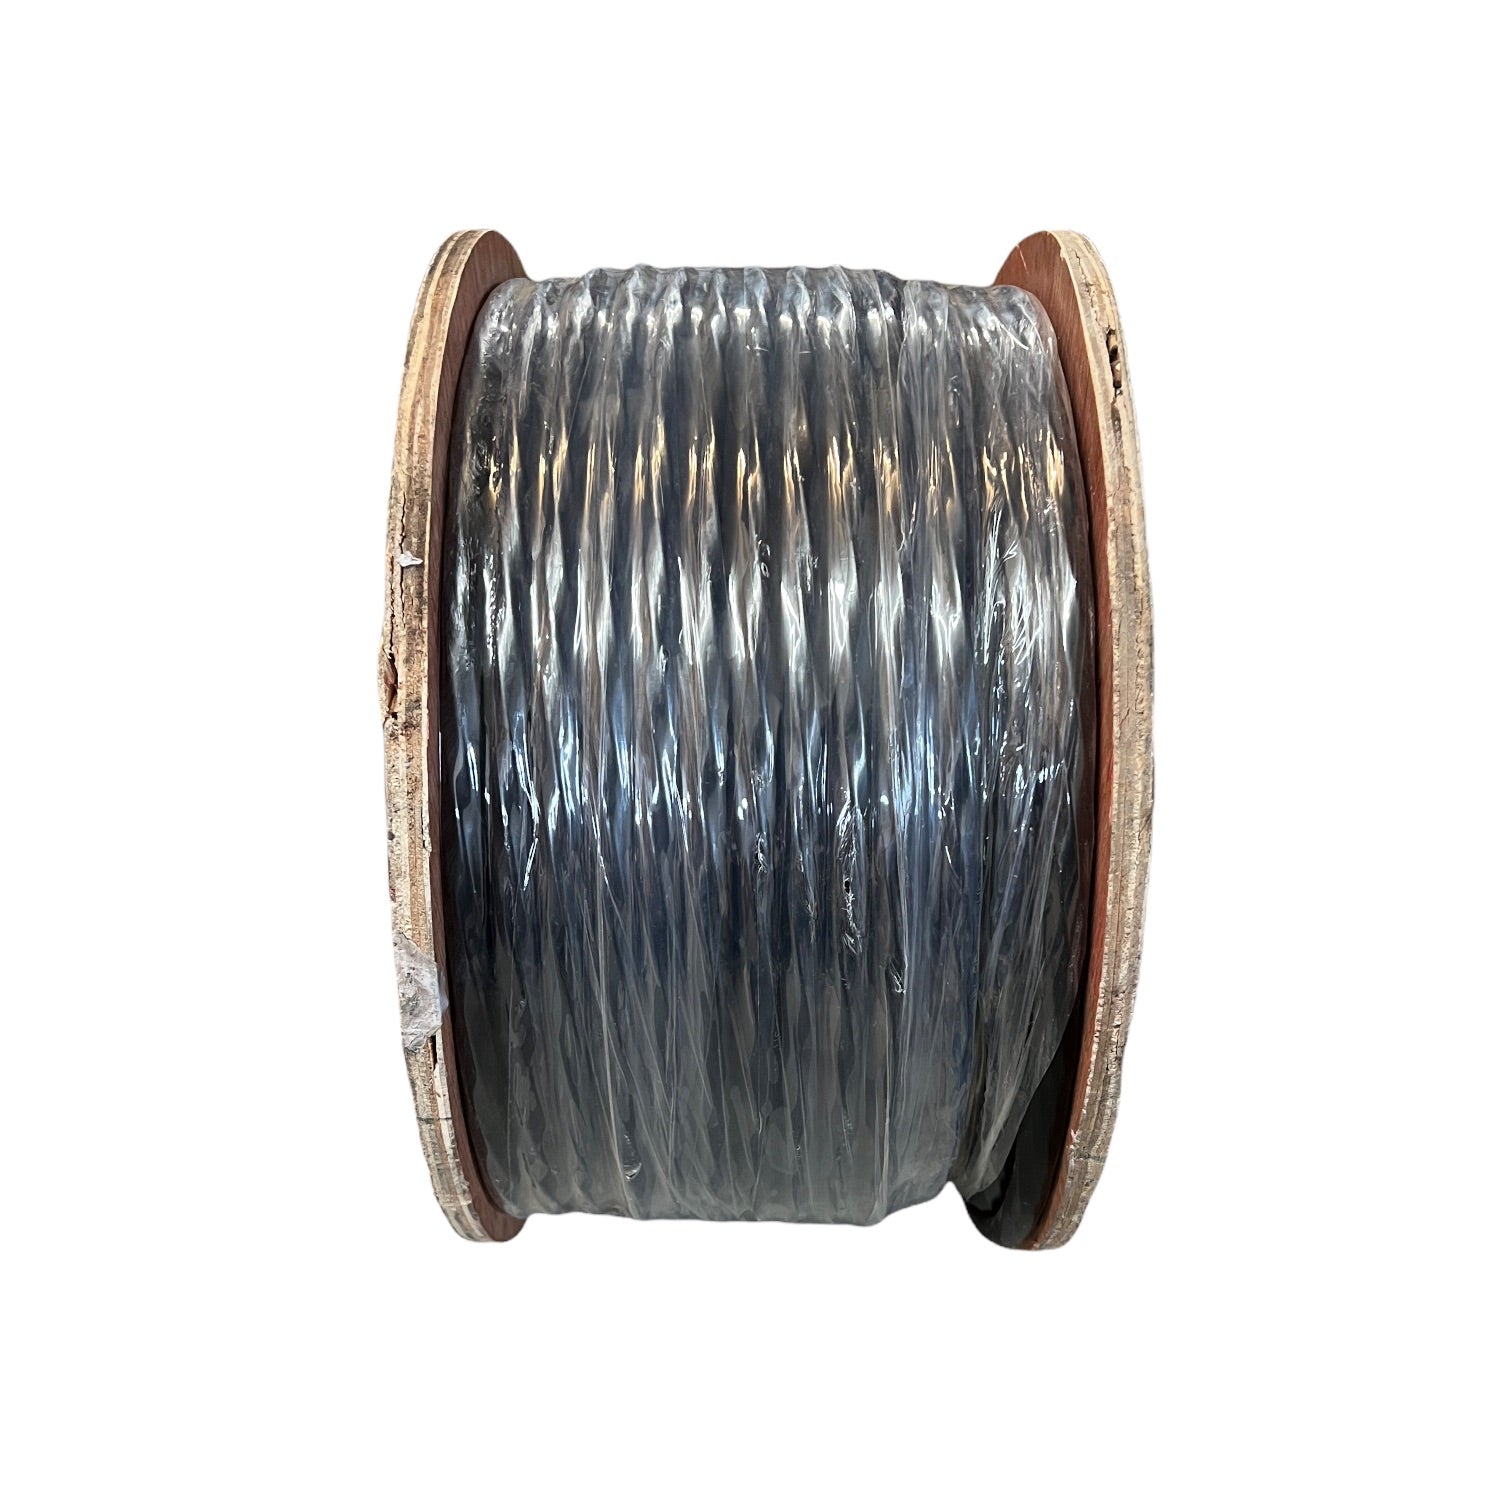 18/16X500 - Multi-Conductor Irrigation Control Wire, 18 awg, 18/16 X 500 ft